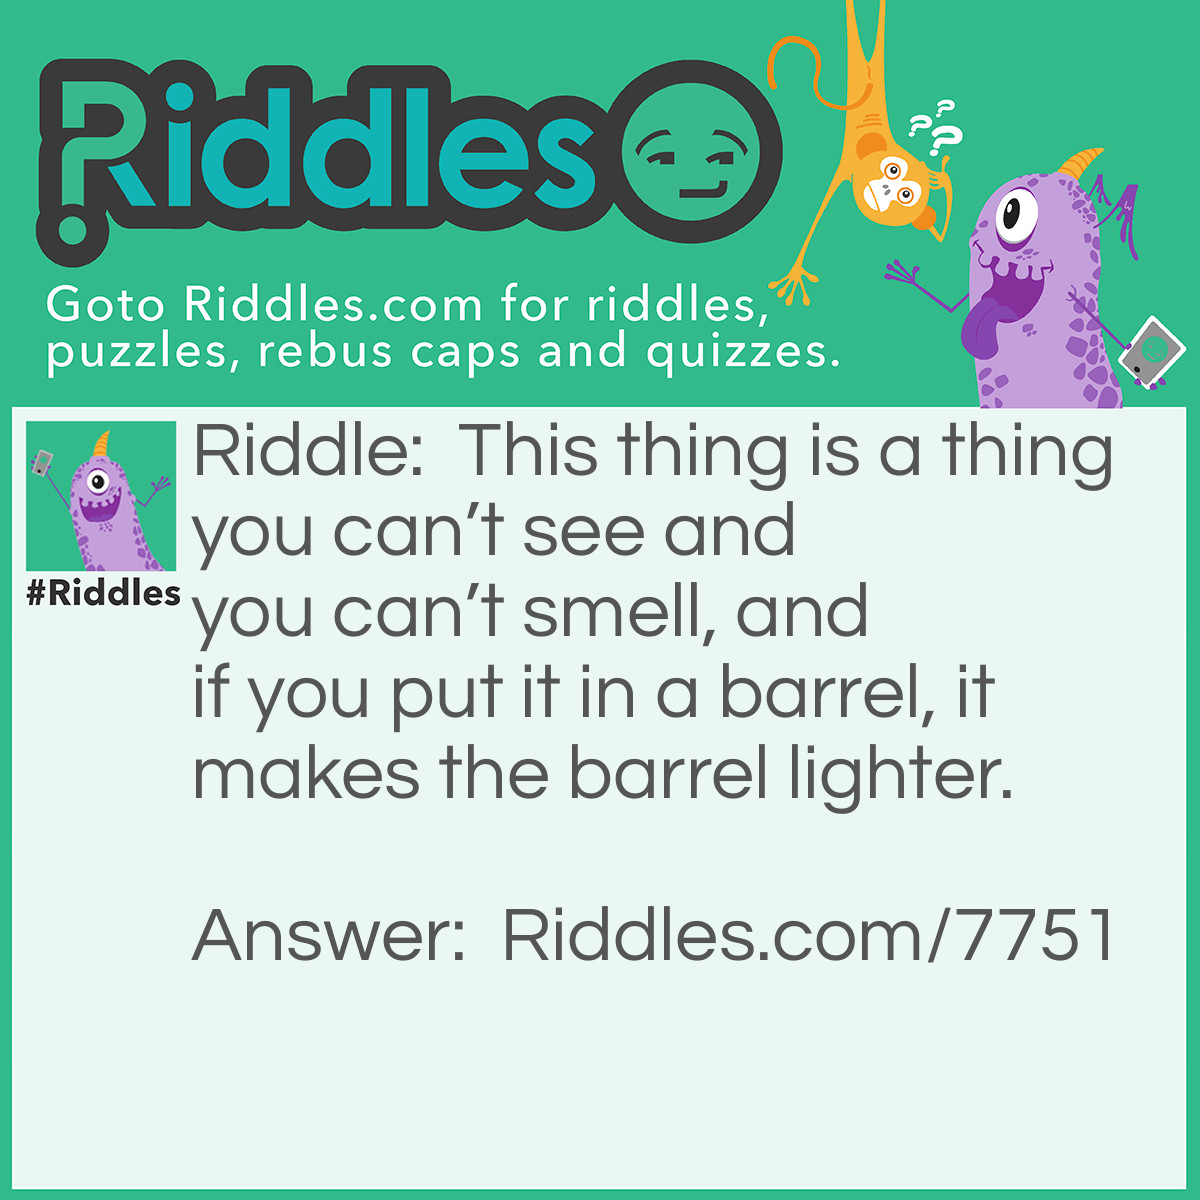 Riddle: This thing is a thing you can't see and you can't smell, and if you put it in a barrel, it makes the barrel lighter. Answer: A hole